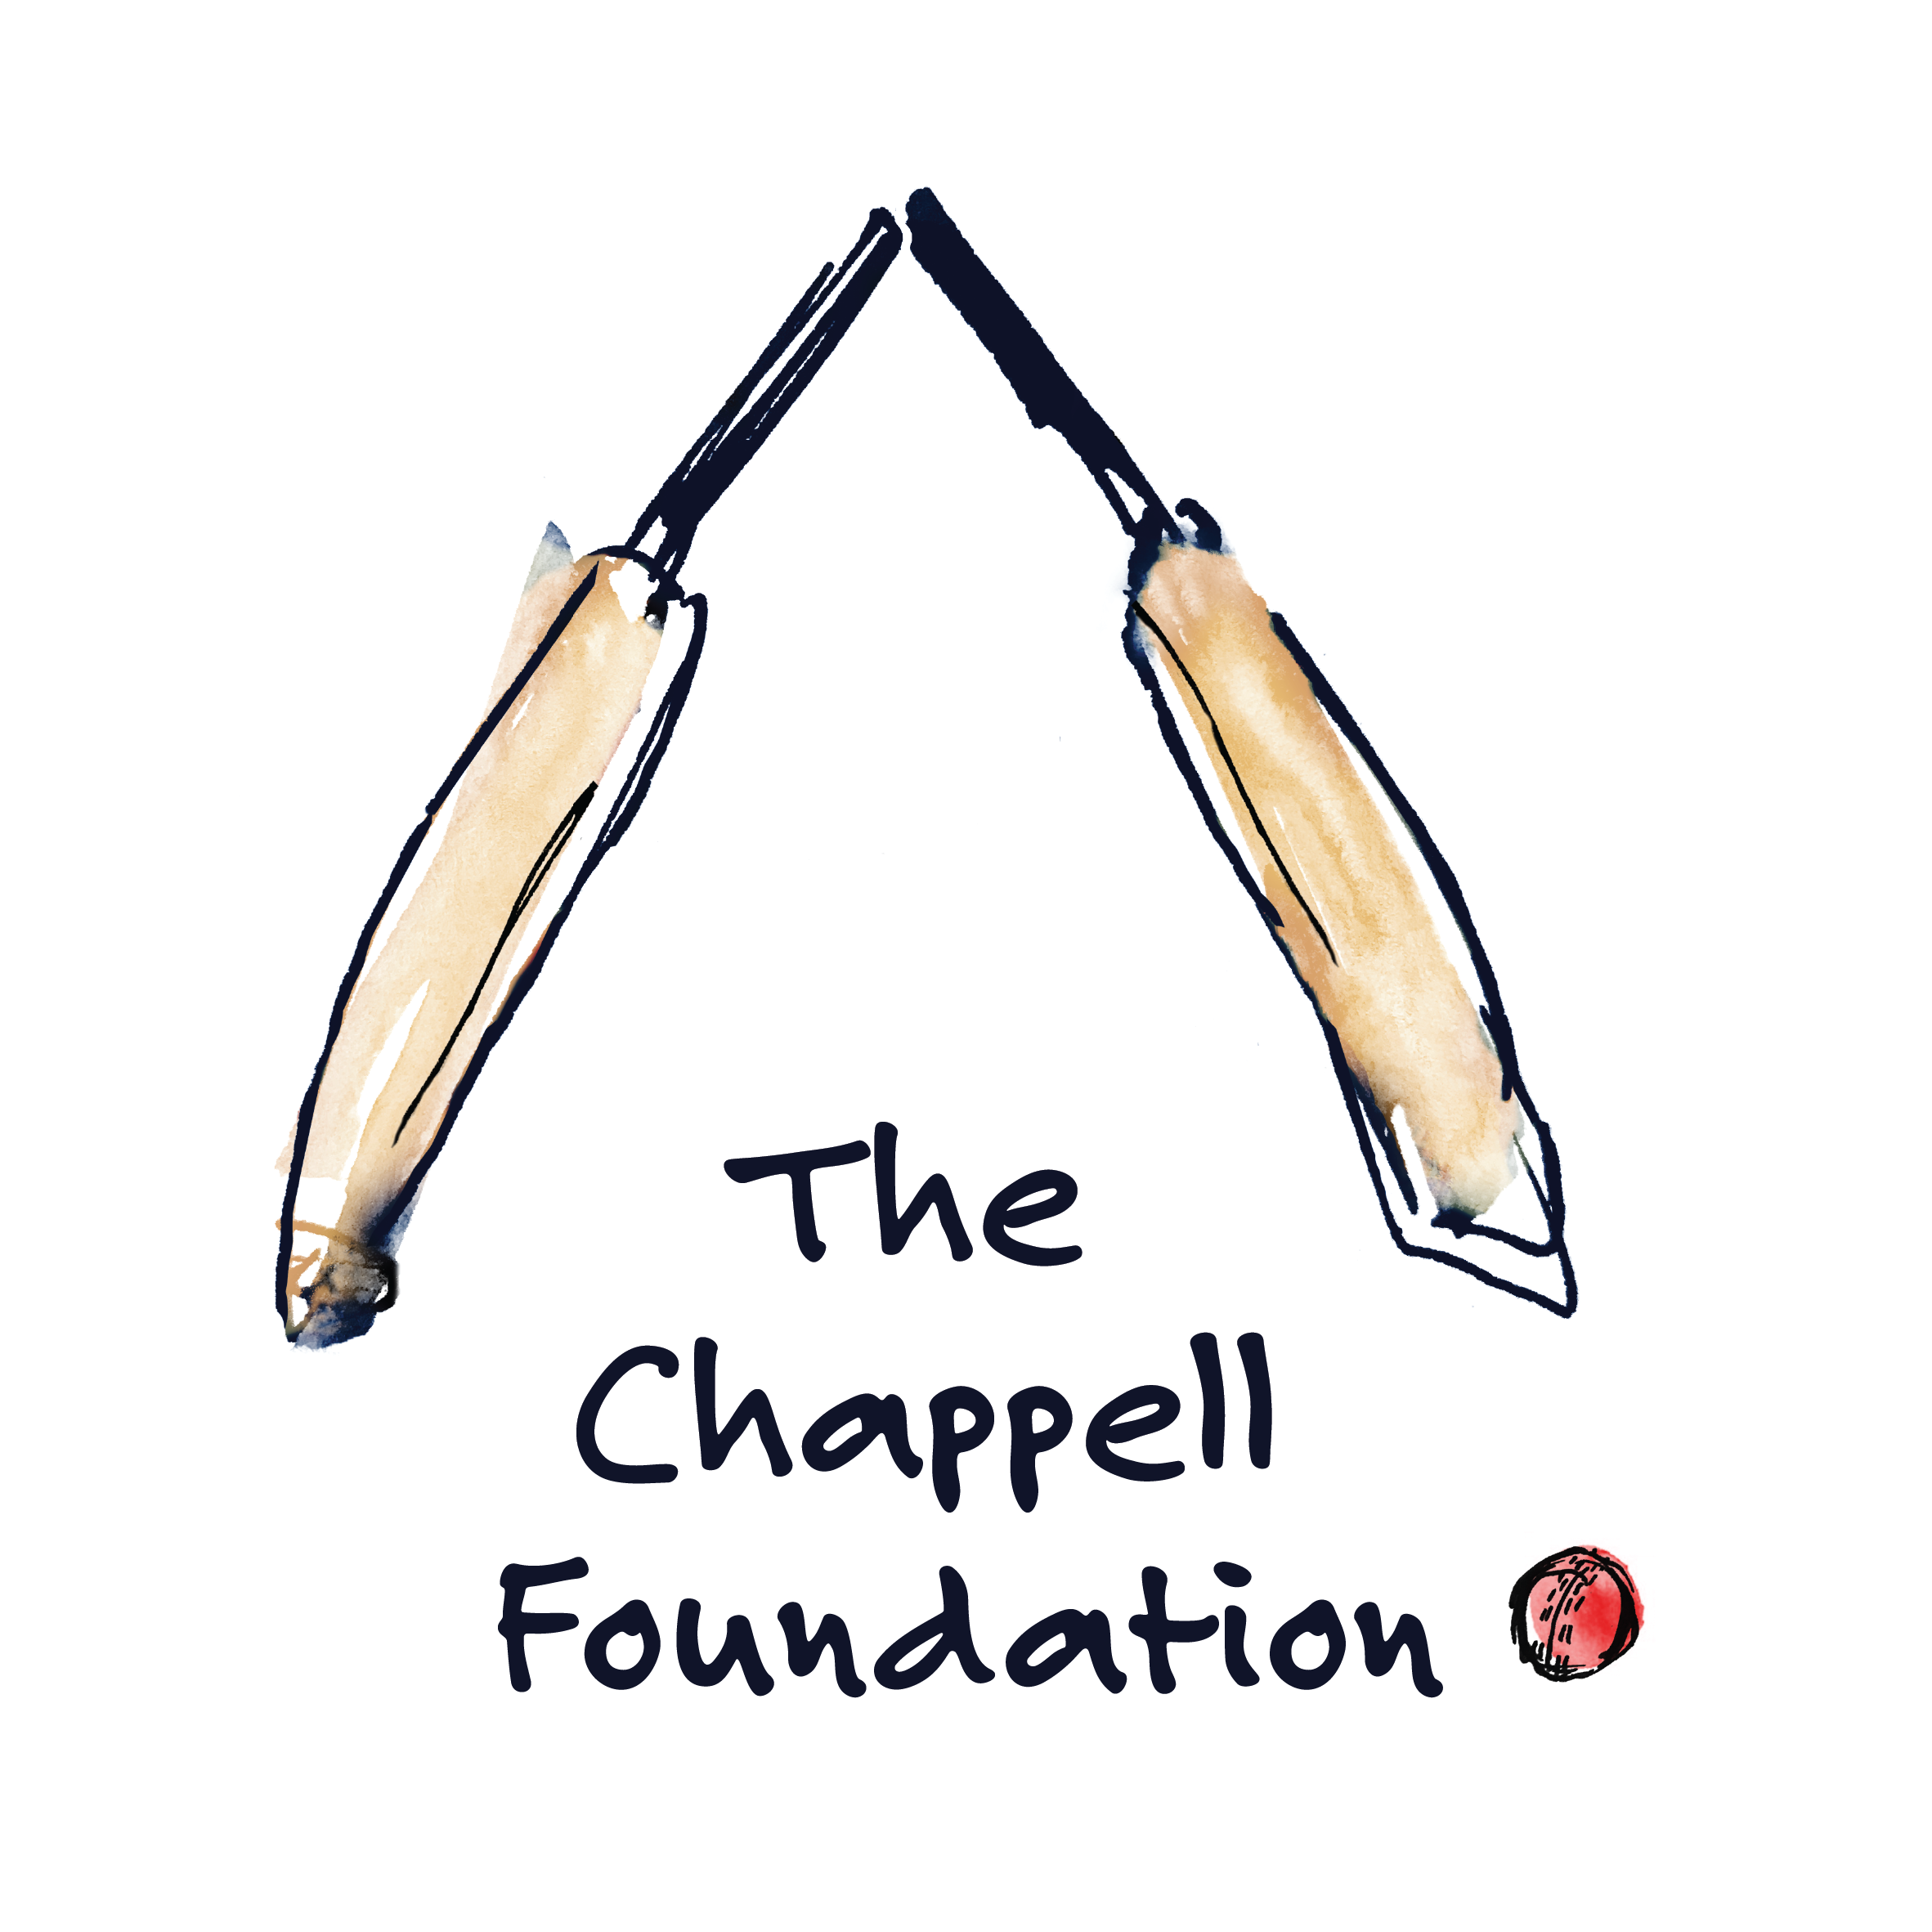 ALSPEC was proud to take part in The Chappell Foundation 5th Annual Dinner